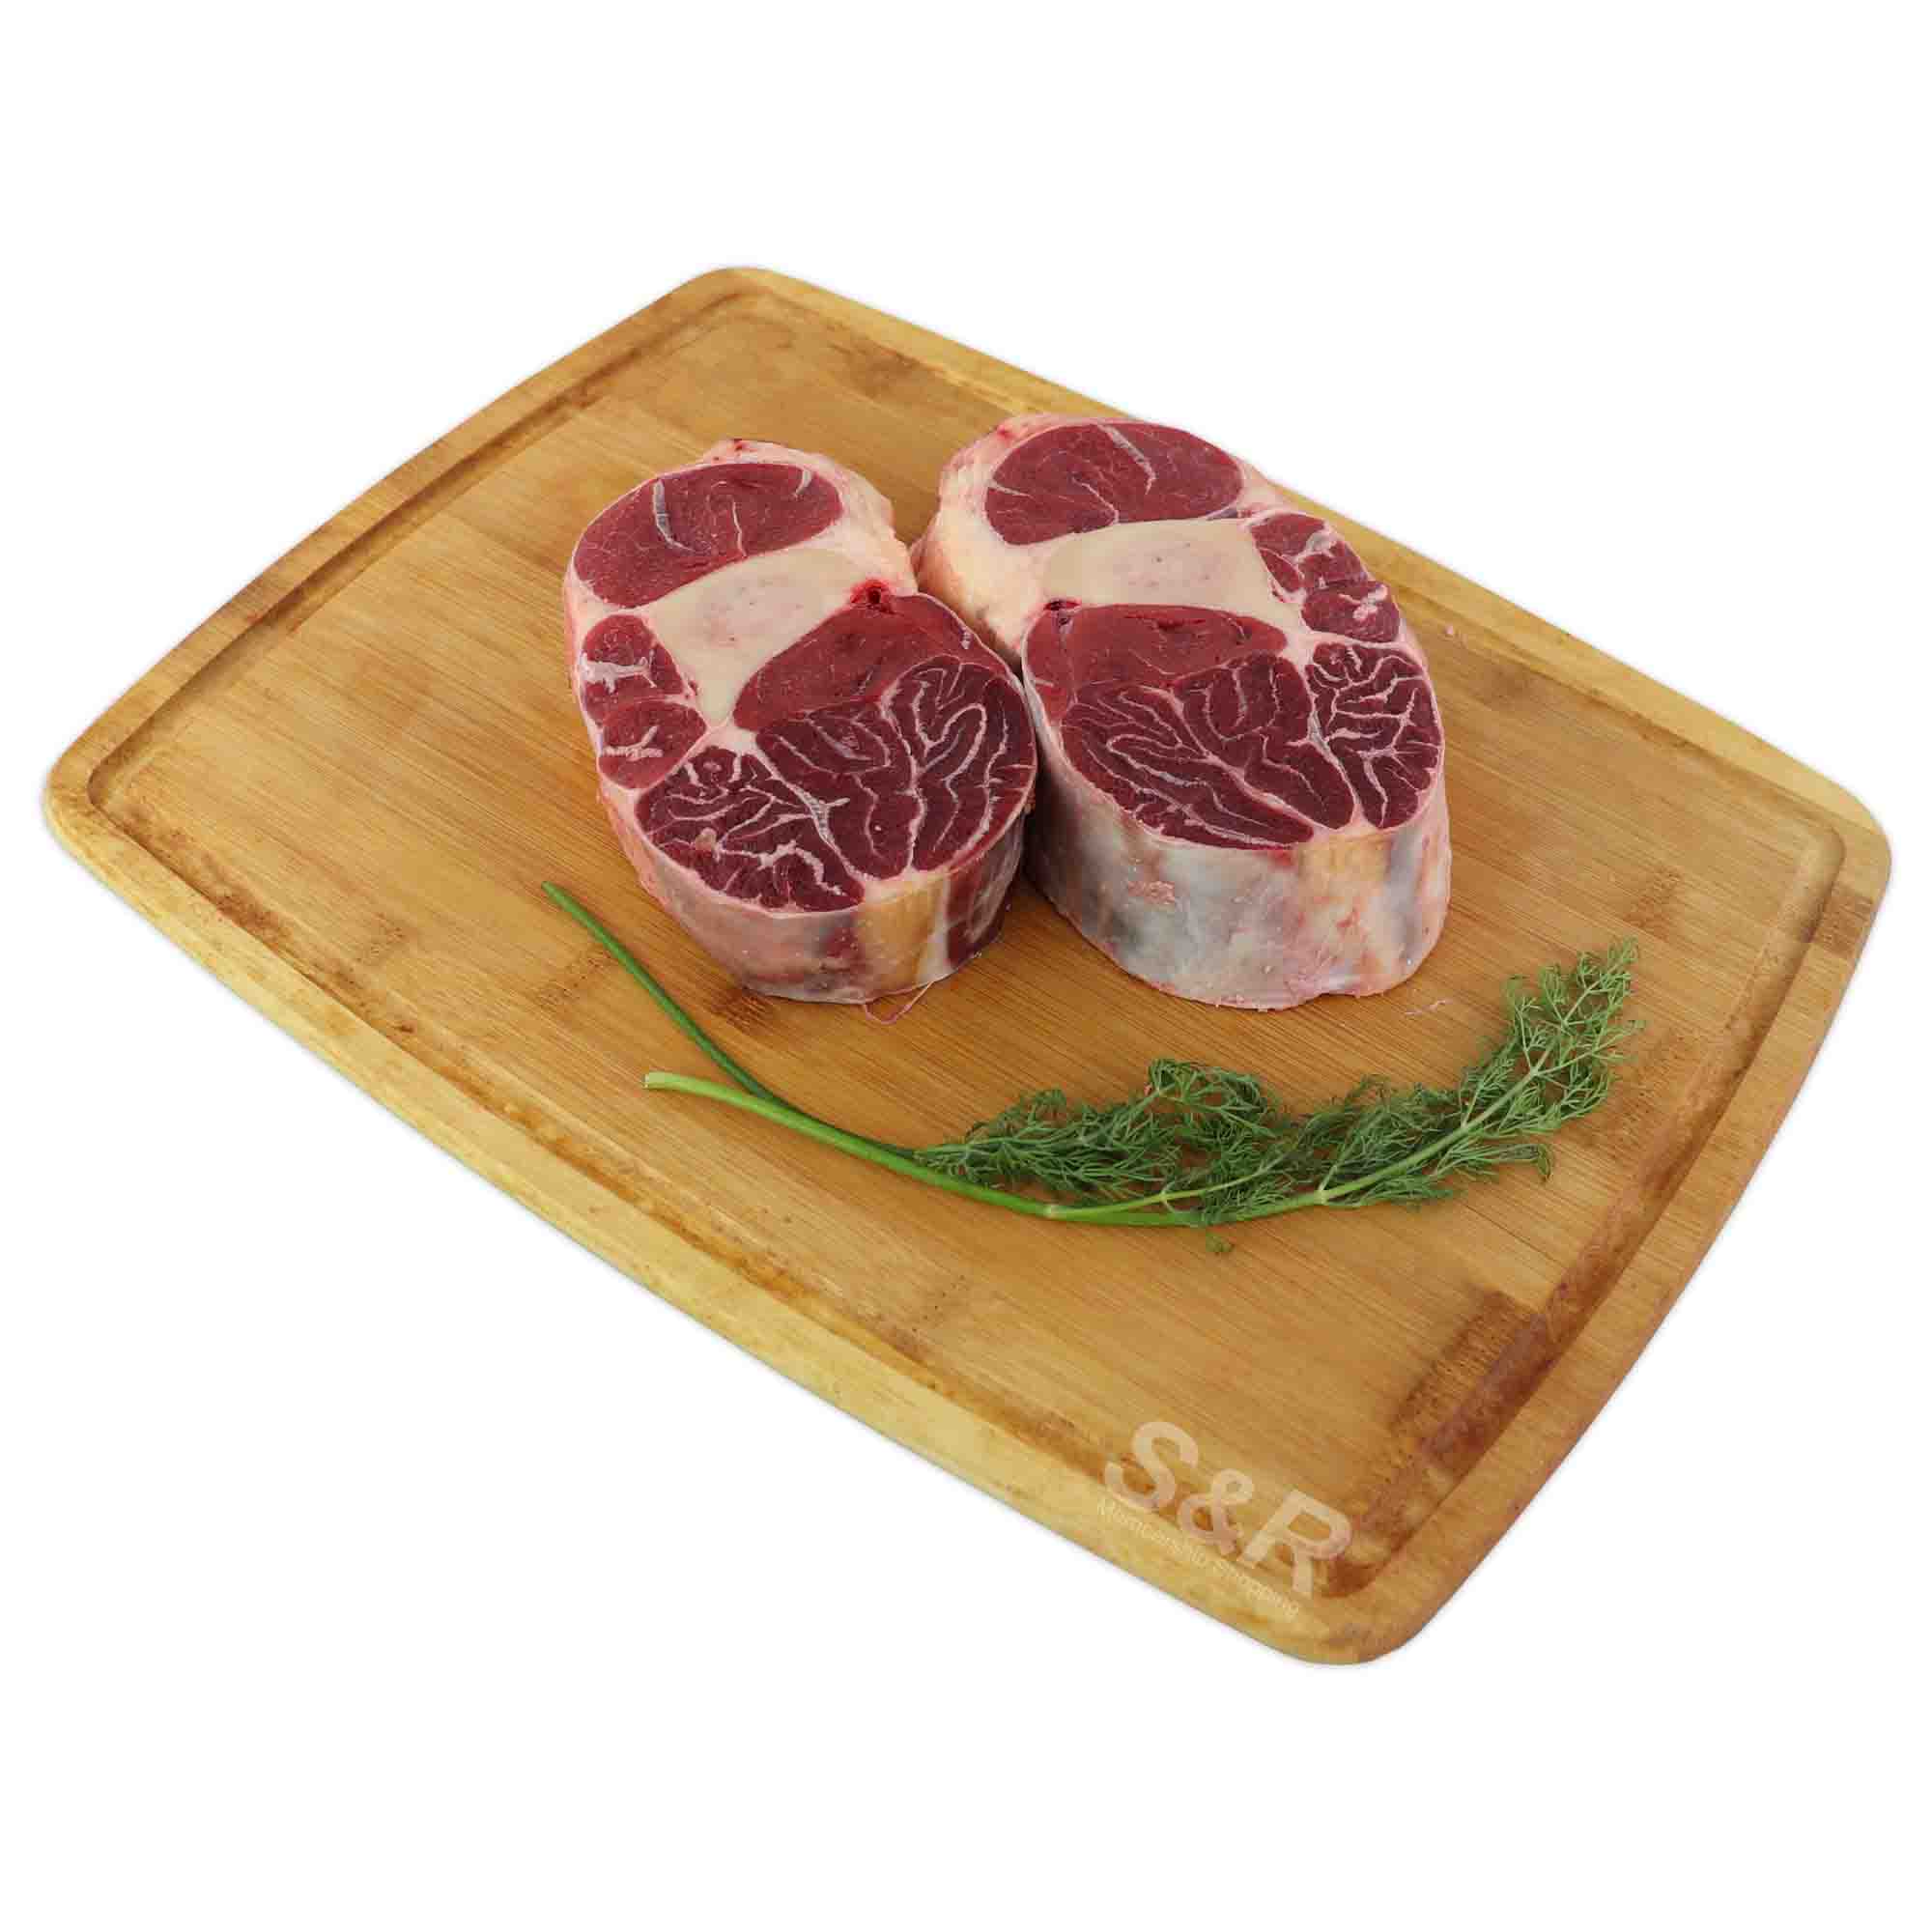 S&R Beef Shank approx. 2kg